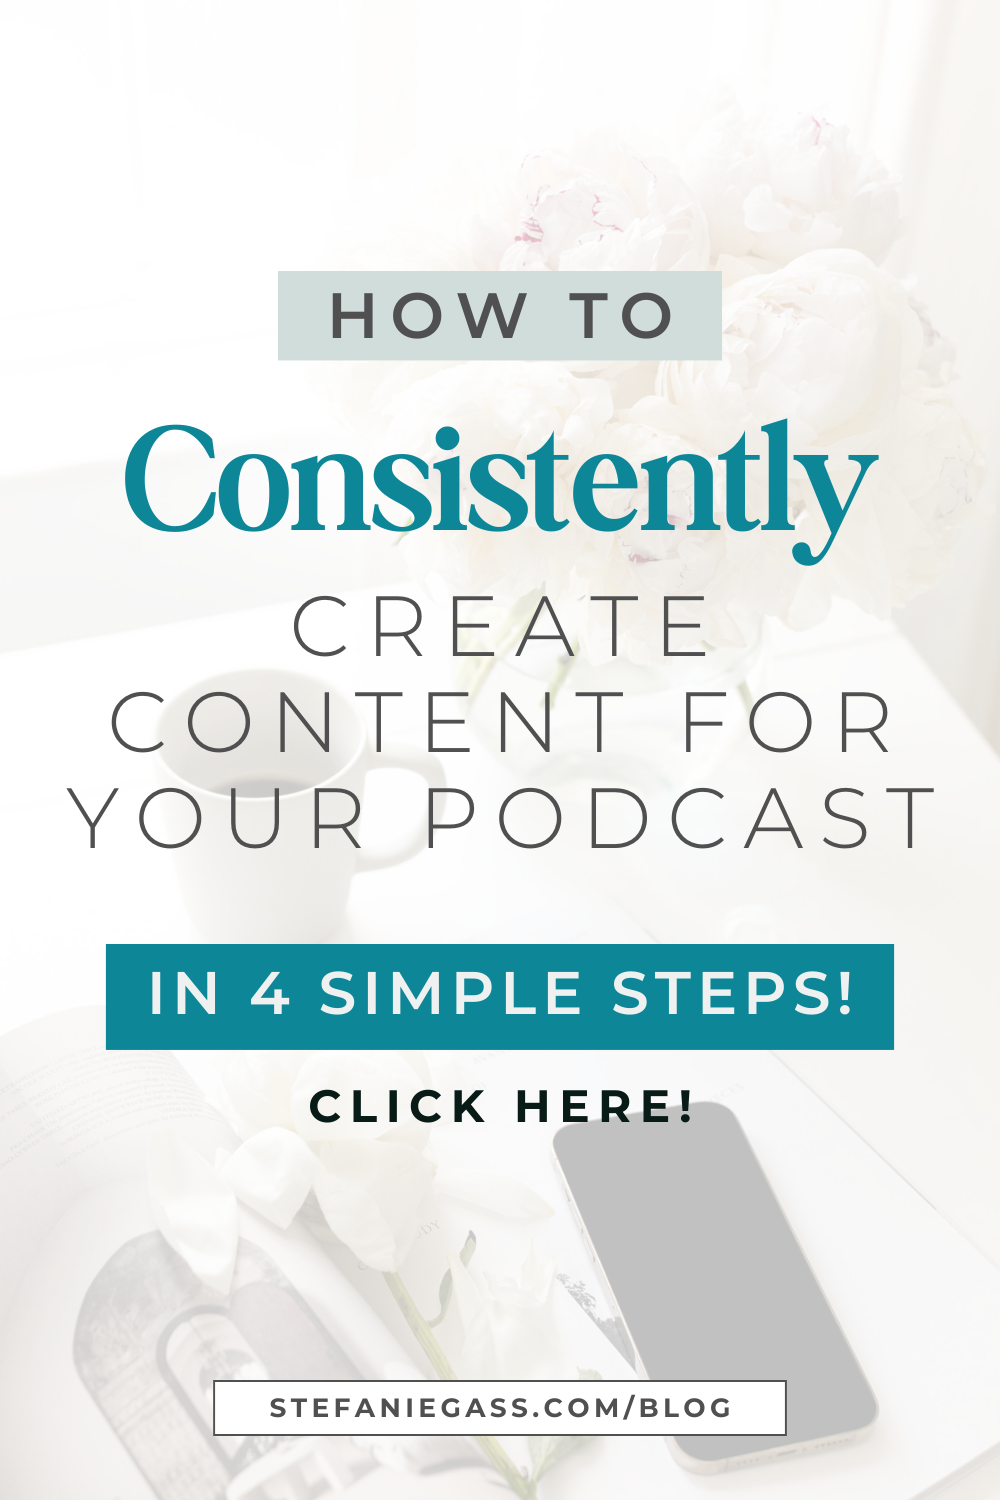 How to Consistently create content for your podcast in 4 simple steps! Click here.